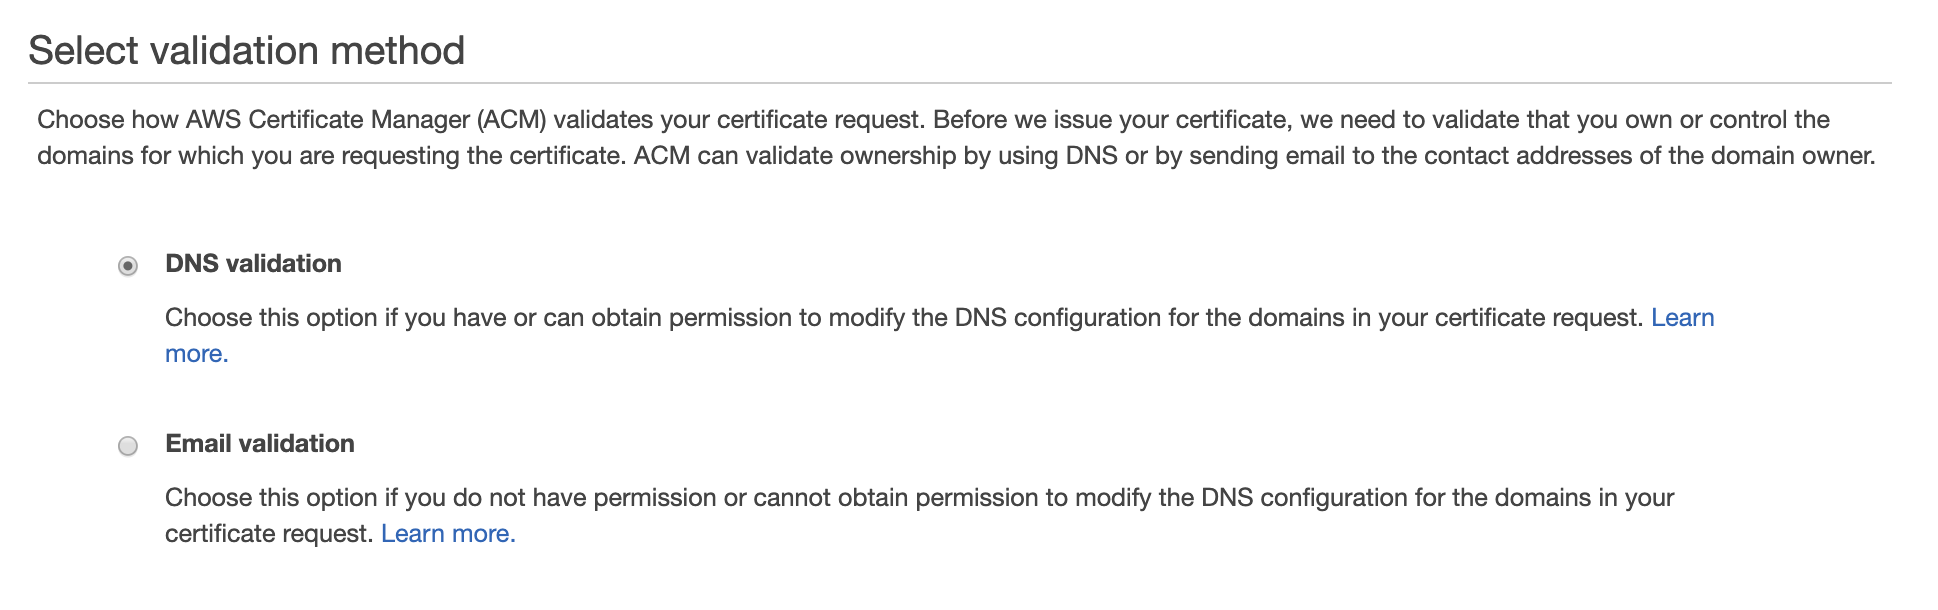 Select validation method

Choose how AWS Certificate Manager (ACM) validates your certificate request. Before we issue your certificate, we need to validate that you own or control the
domains for which you are requesting the certificate. ACM can validate ownership by using DNS or by sending email to the contact addresses of the domain owner.

© DNS validation

Choose this option if you have or can obtain permission to modify the DNS configuration for the domains in your certificate request. Learn
more.

© Email validation

Choose this option if you do not have permission or cannot obtain permission to modify the DNS configuration for the domains in your
certificate request. Learn more.